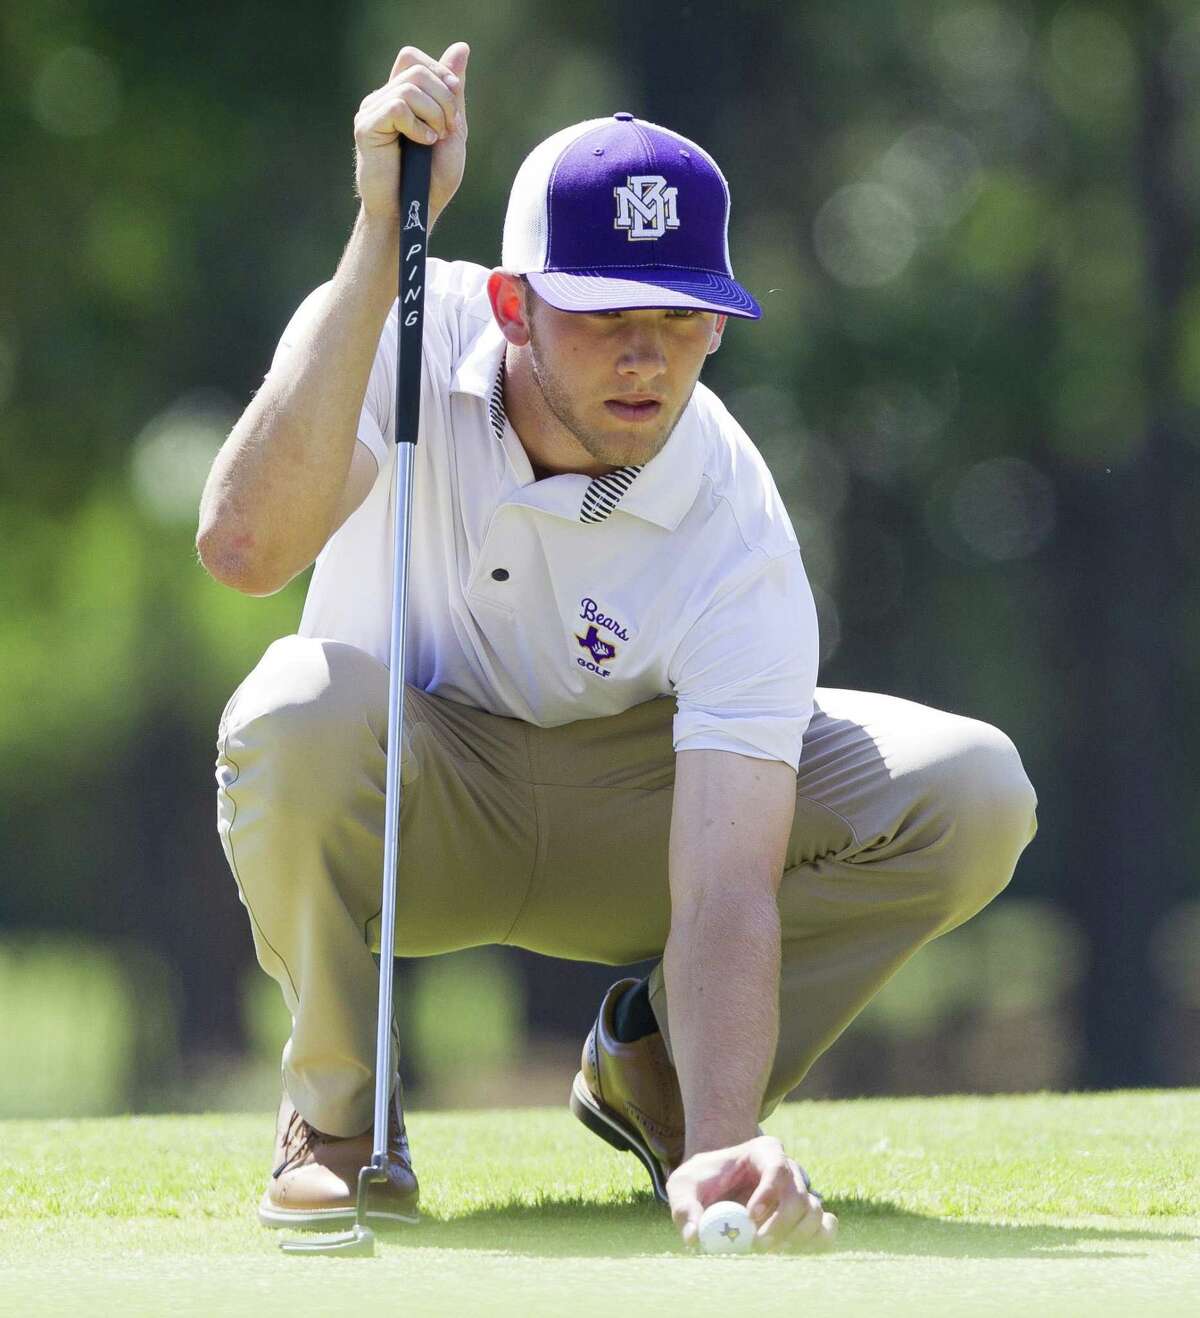 Terrin Anderson of Montgomery lines up a putt on the 18th green during the final round of the Region III-5A Boys Golf Championship at the Golf Club at La Torretta, Thursday, April 25, 2019, in Montgomery.